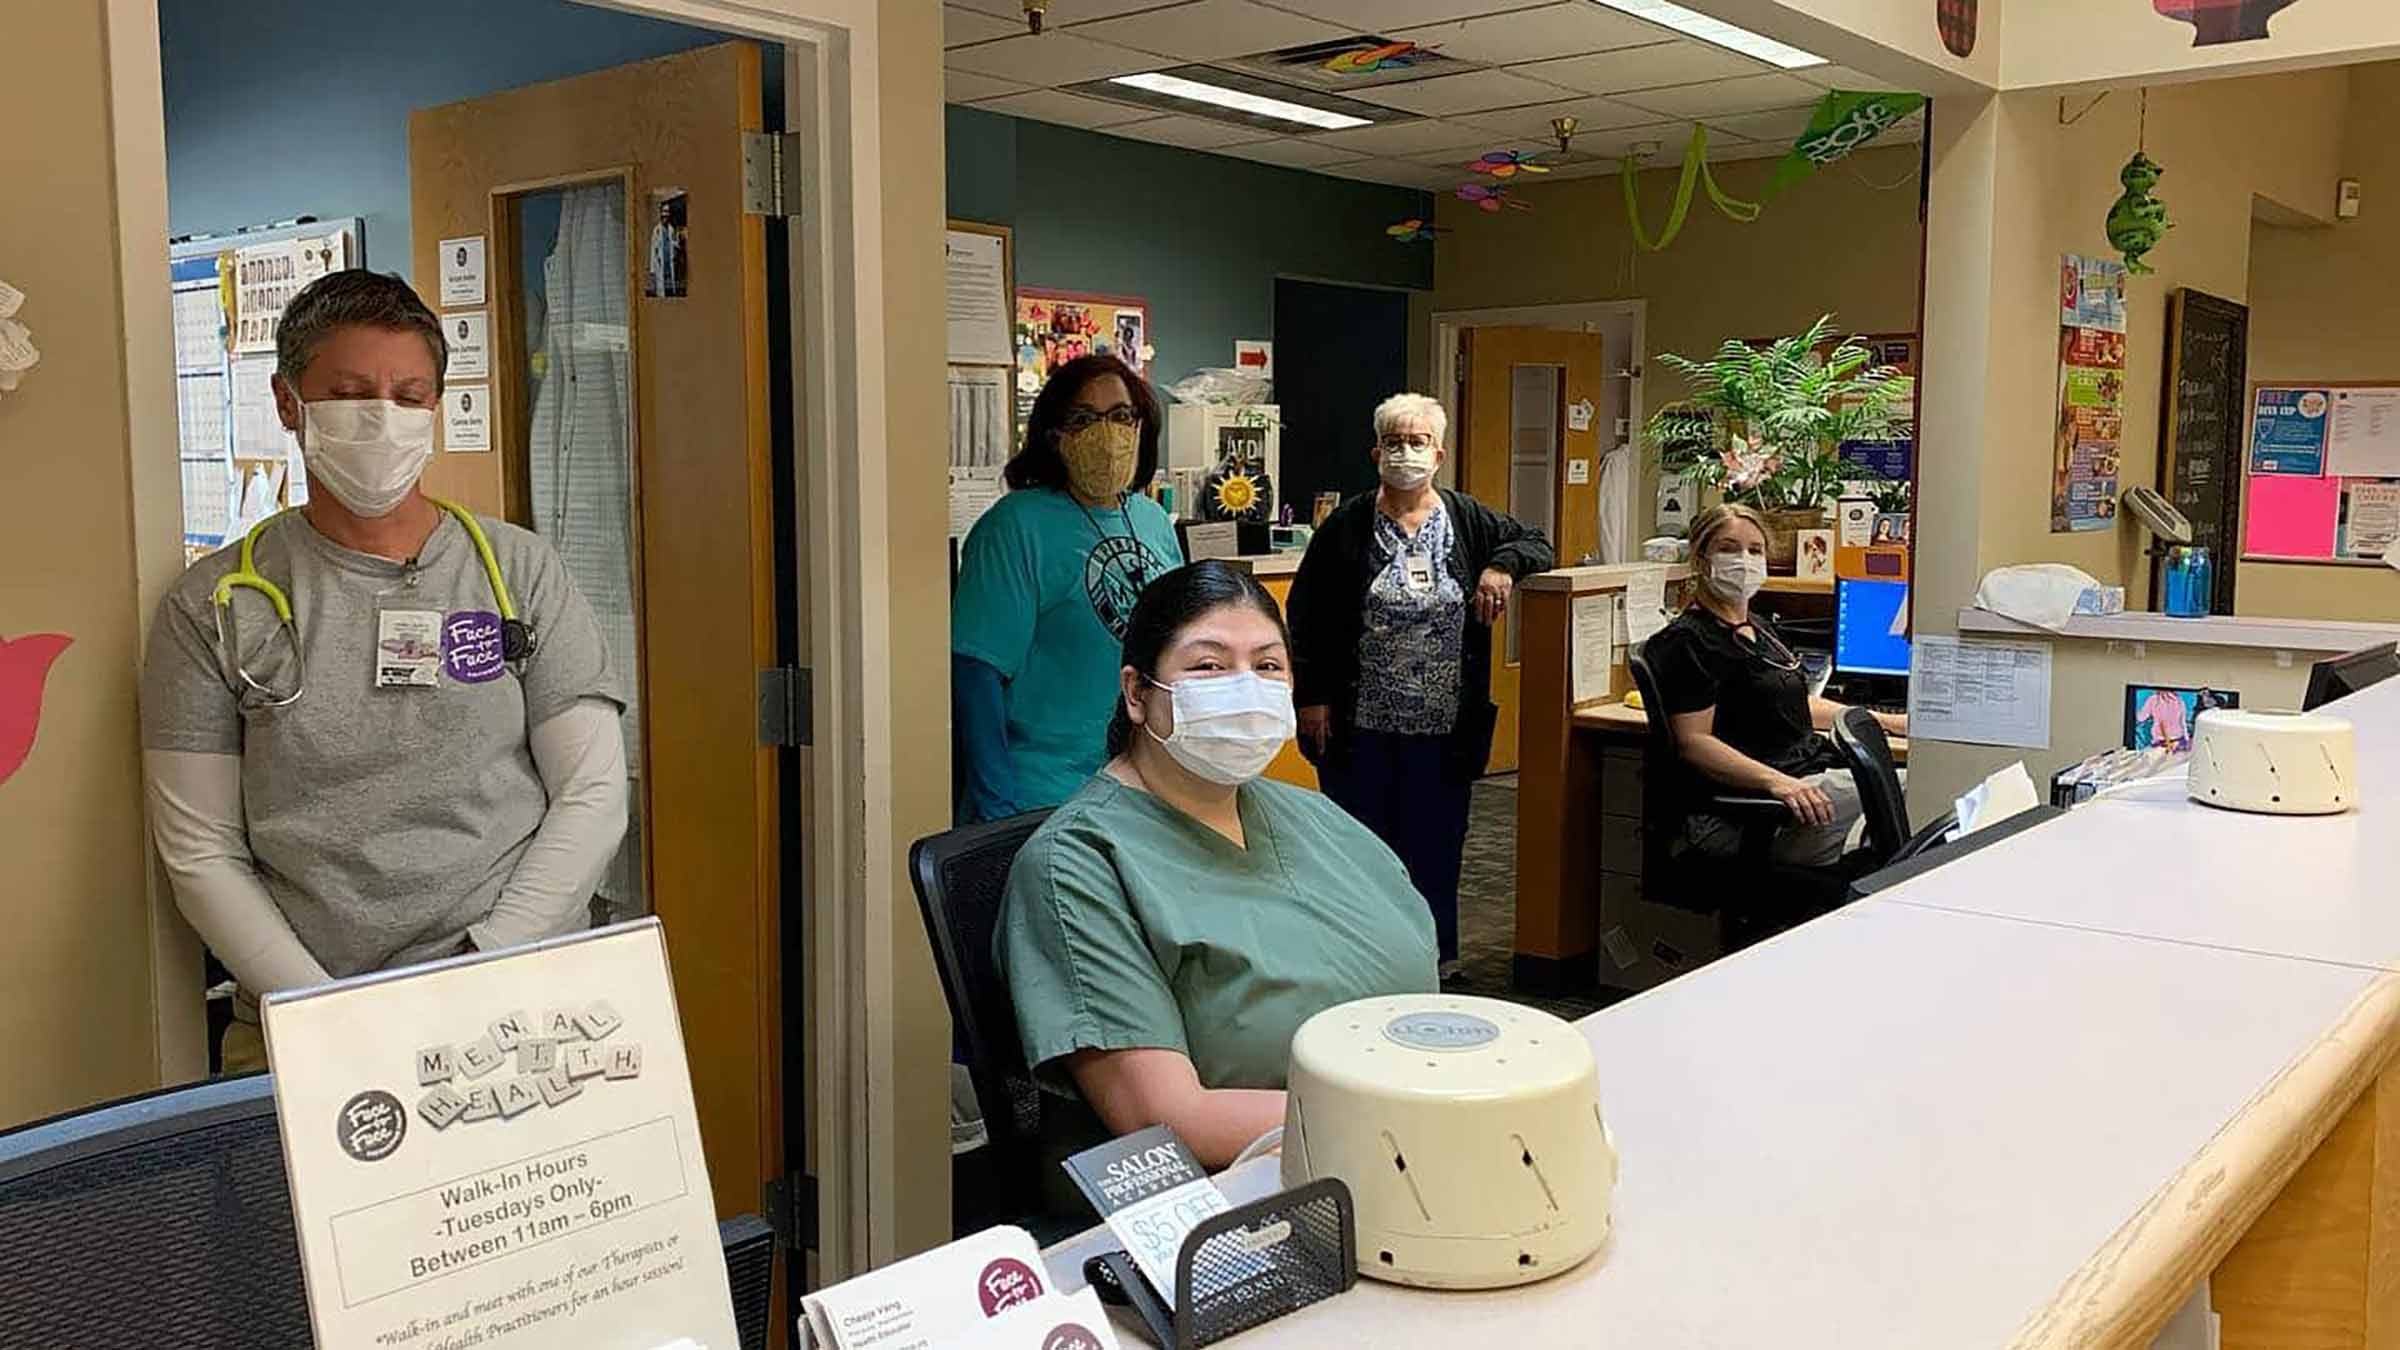 A group of healthcare workers gather together at their office